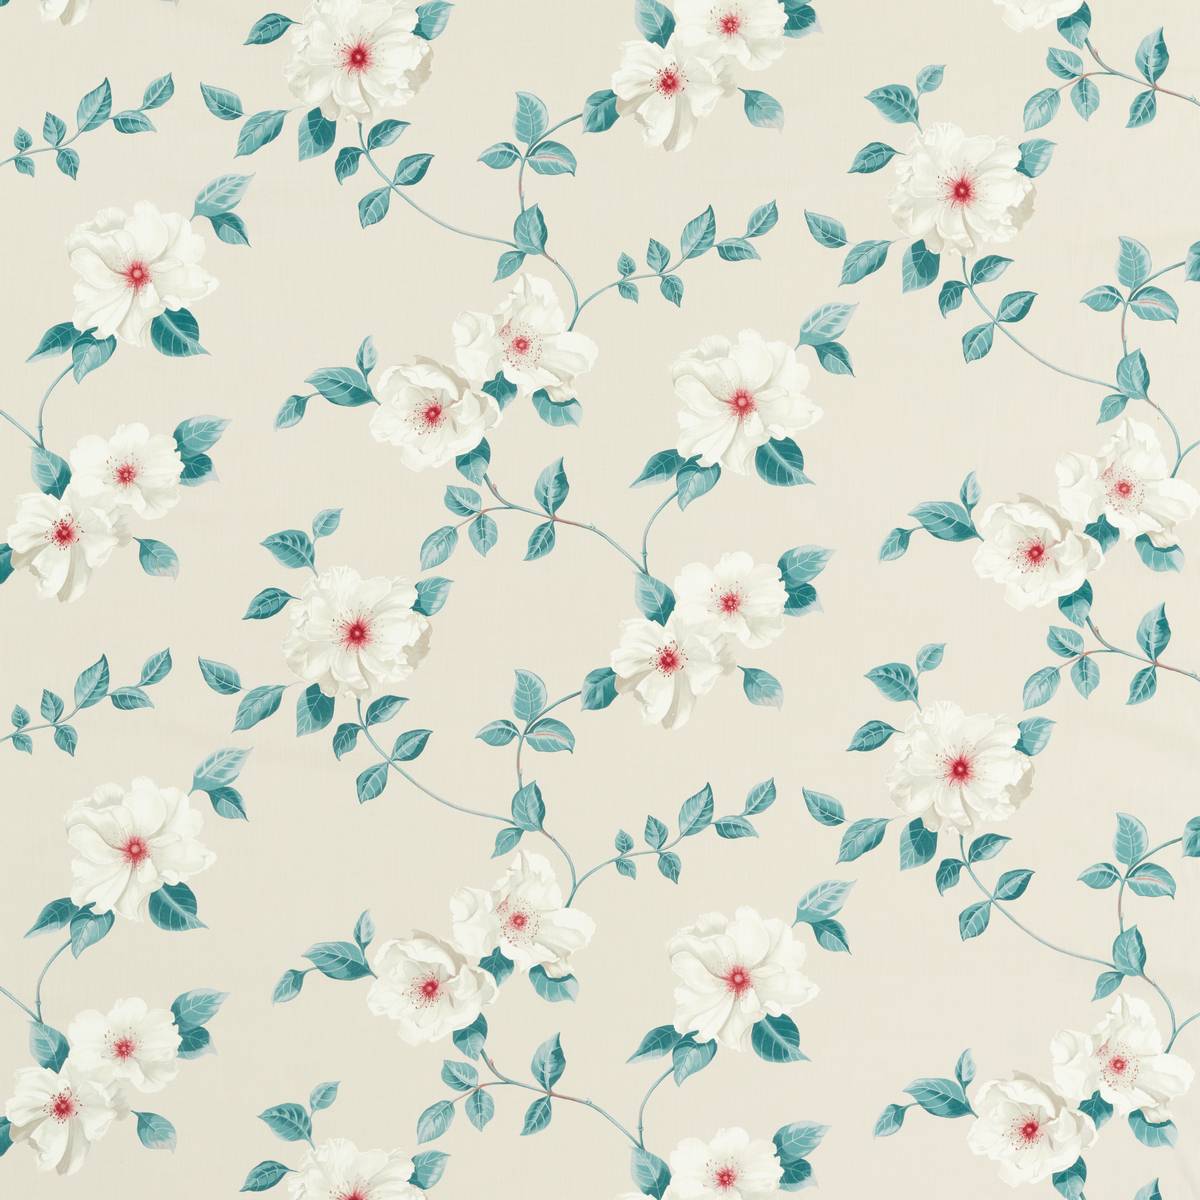 Poet's Rose Blush Fabric by Sanderson